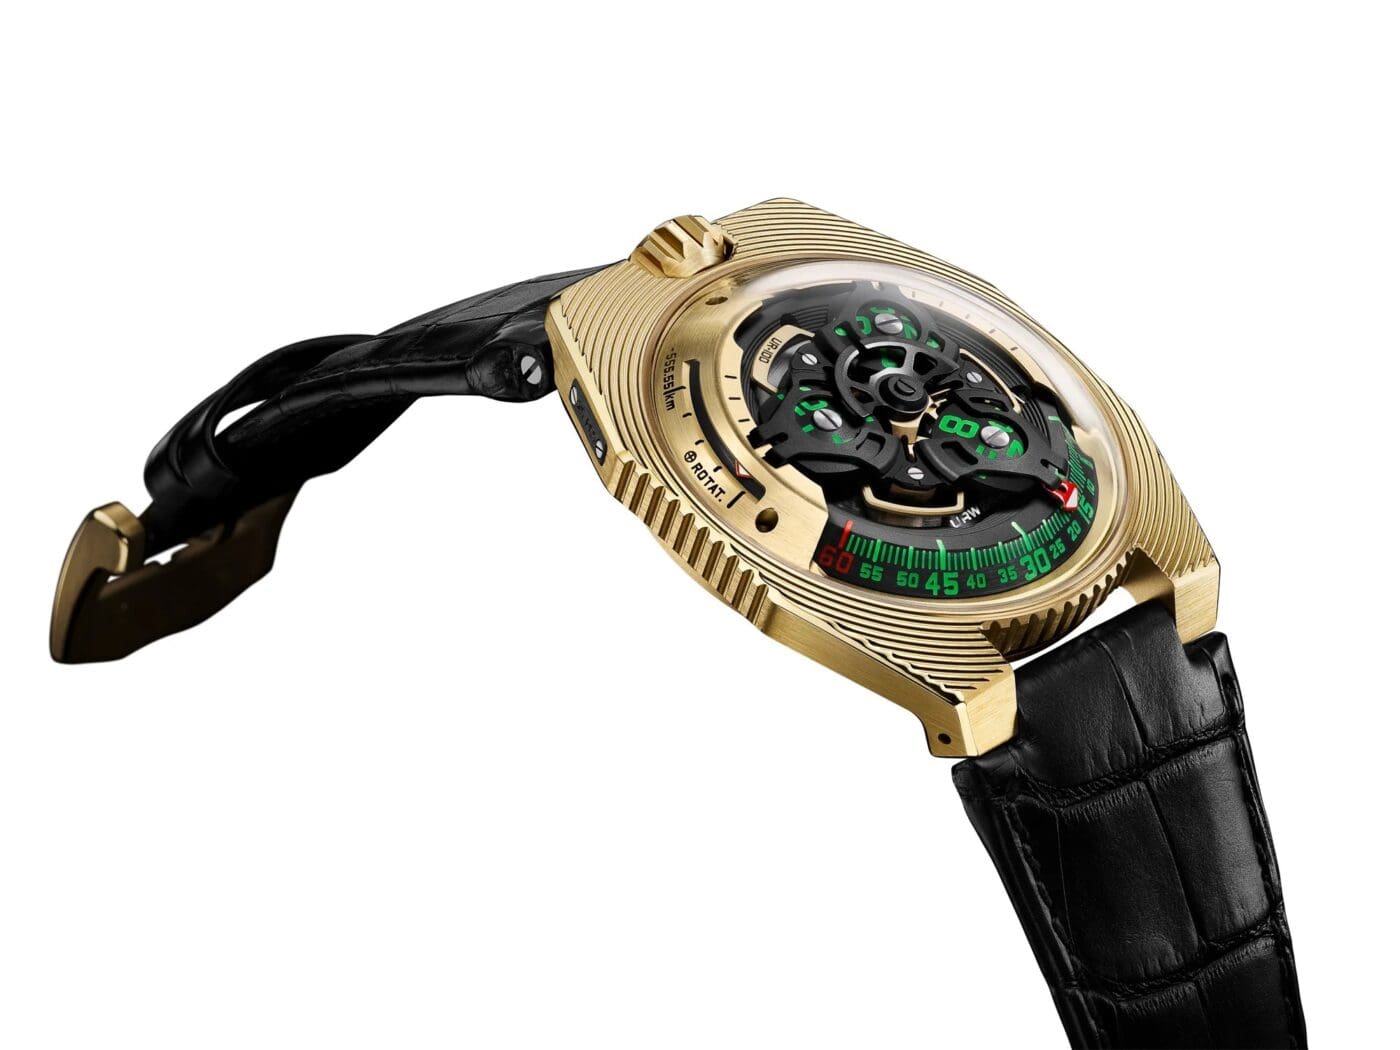 Feature: Top 10 Most Expensive Luxury Watch Brands